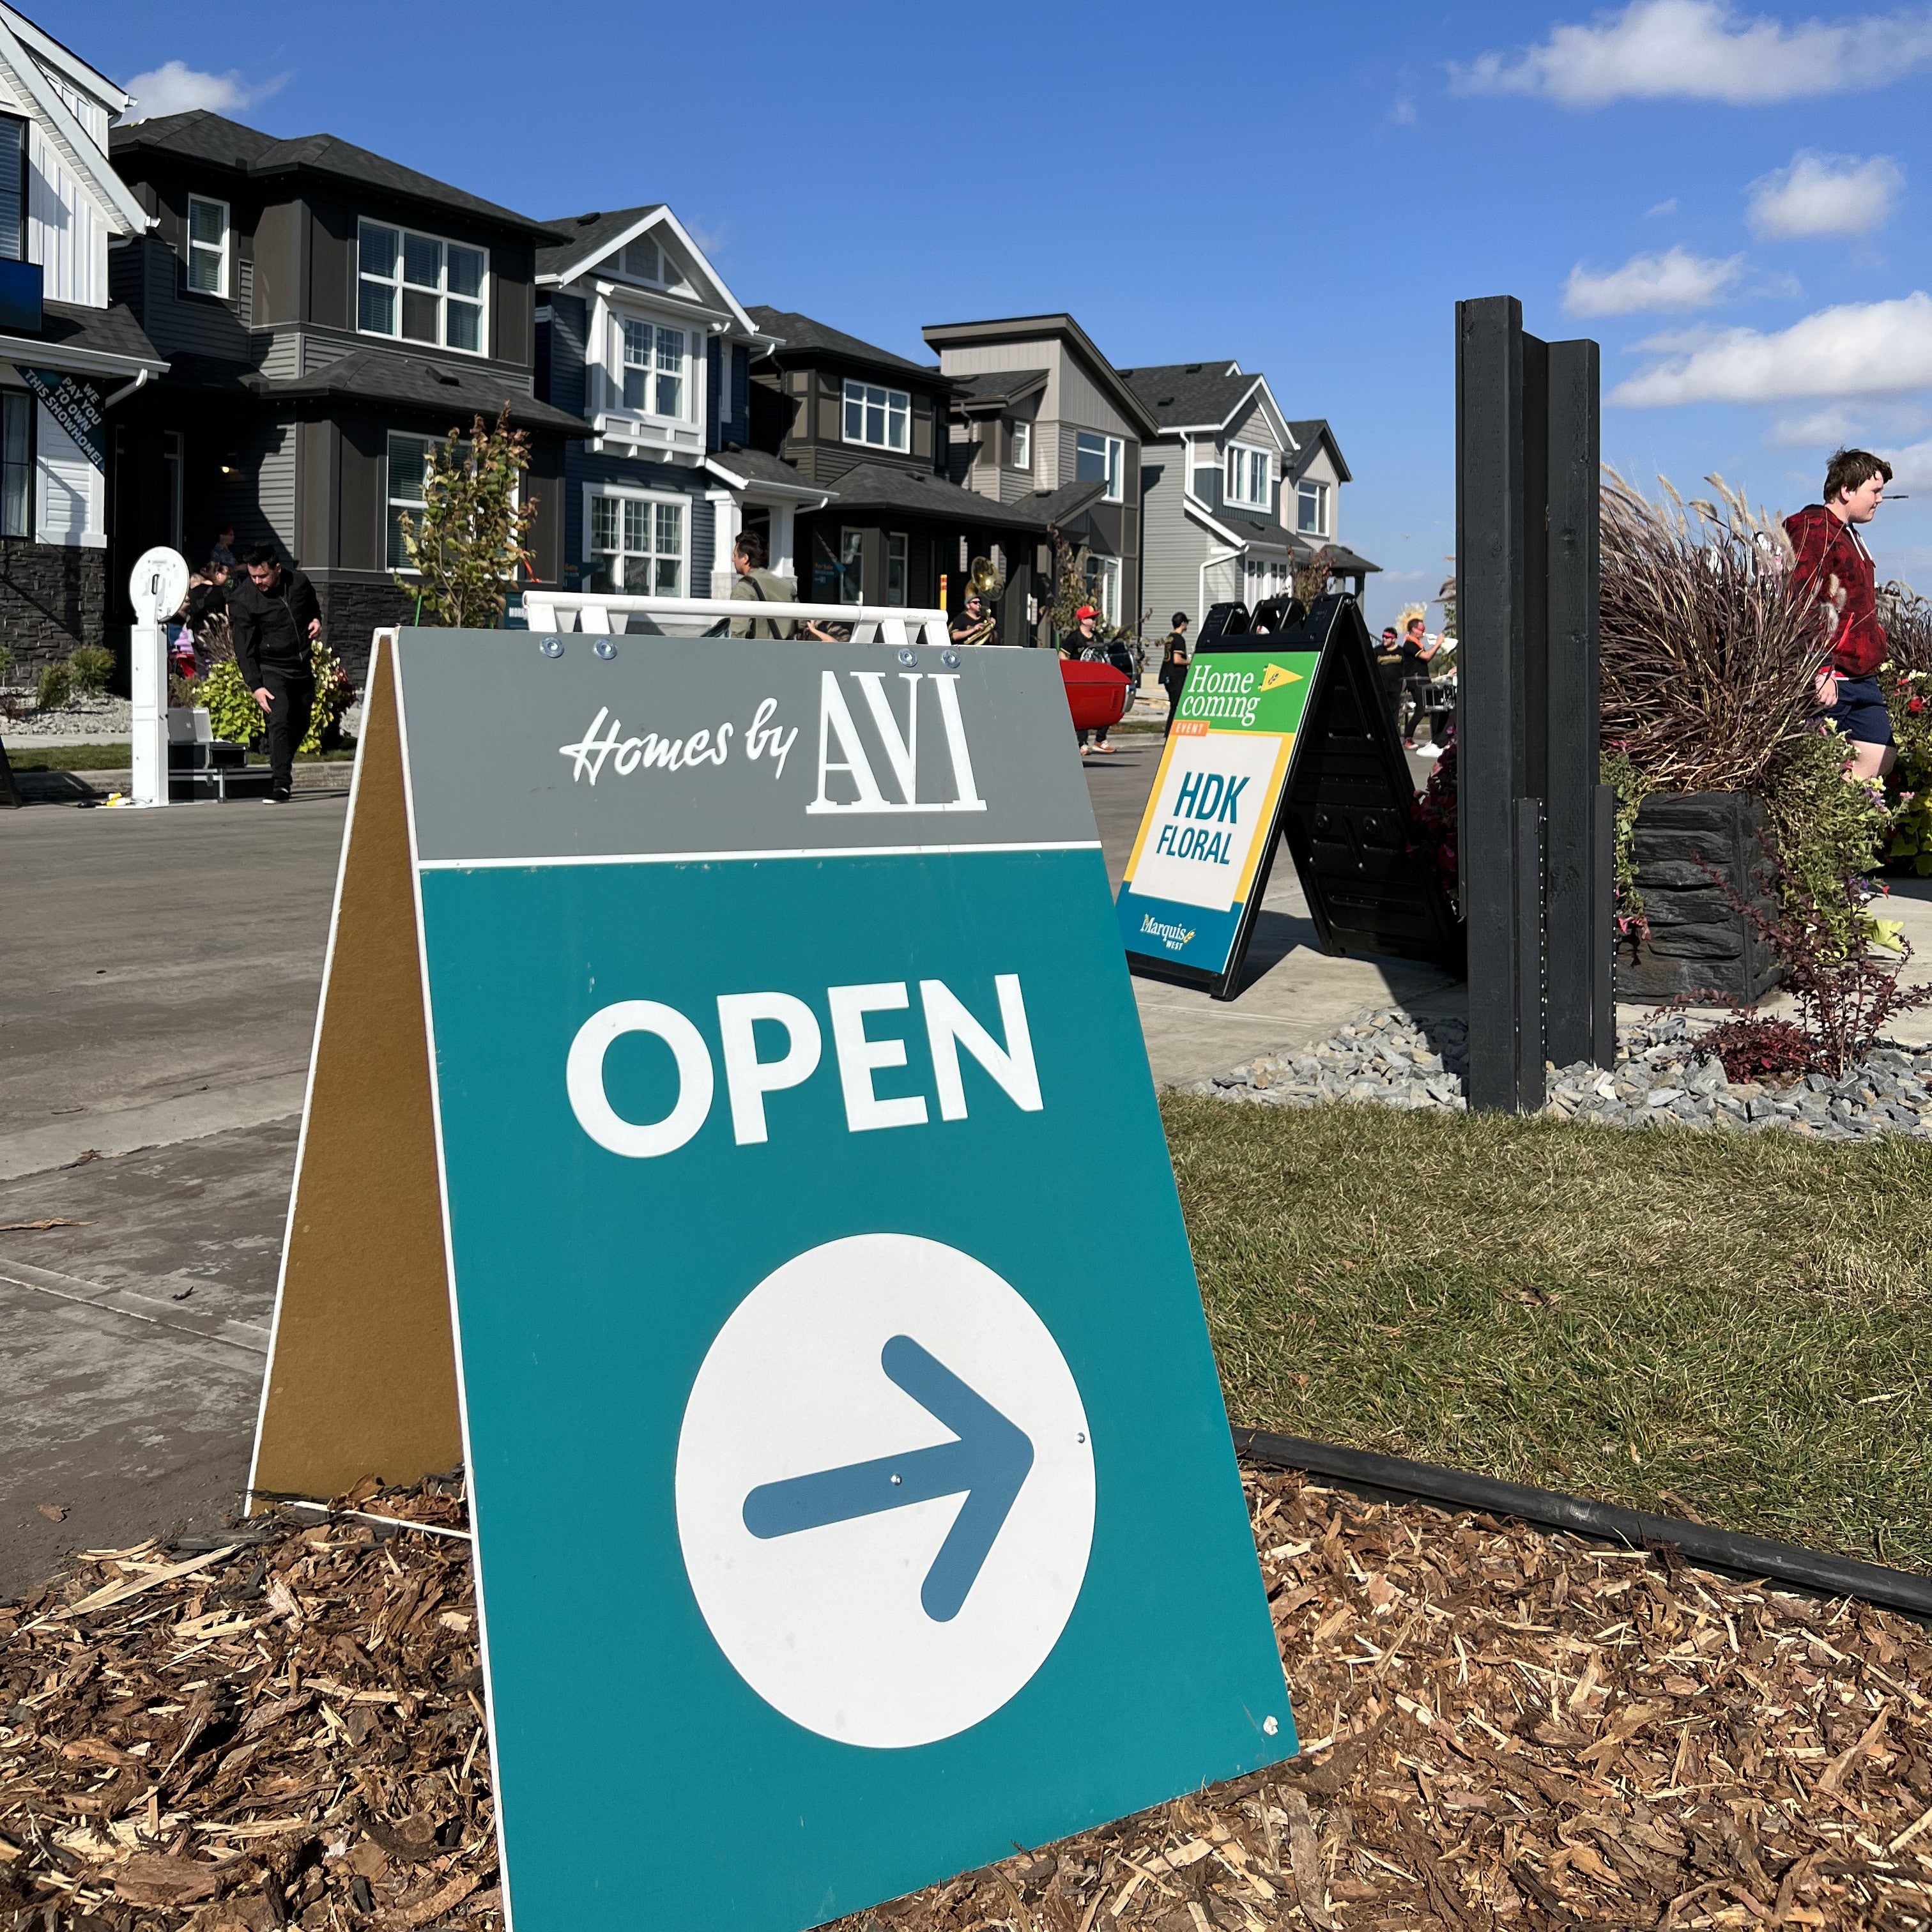 Homes by Avi show home sign says 'OPEN'